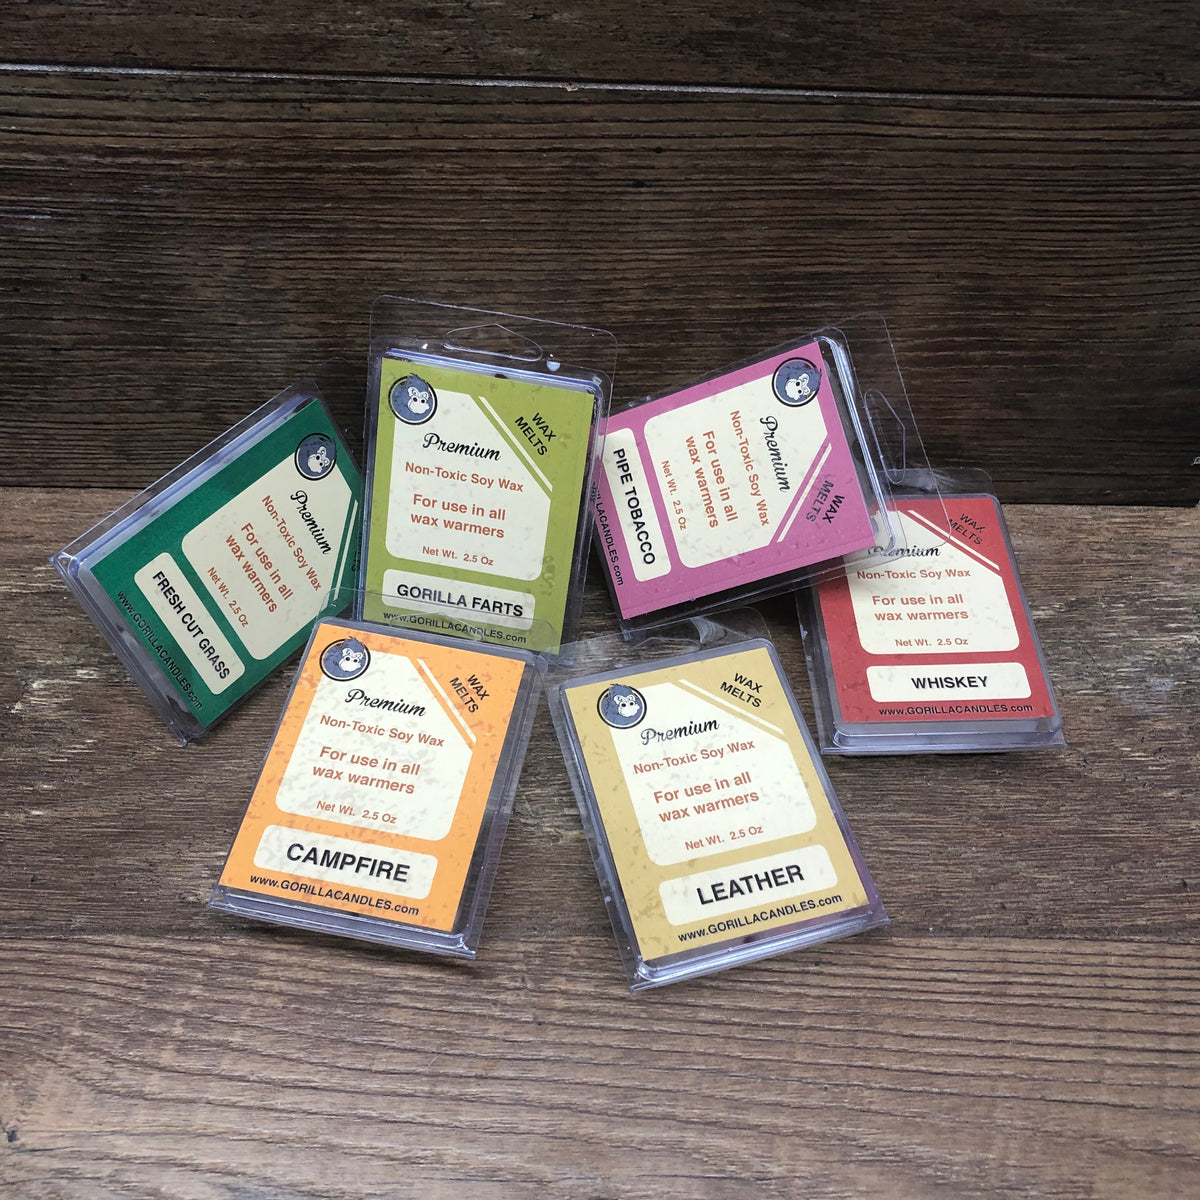 Lollipop Scented Sweet Tarts Soy Wax Melts, Natural Wax Melts, Soy Melts, Scented  Wax Melts, Wax Melt, Gorilla Candles 